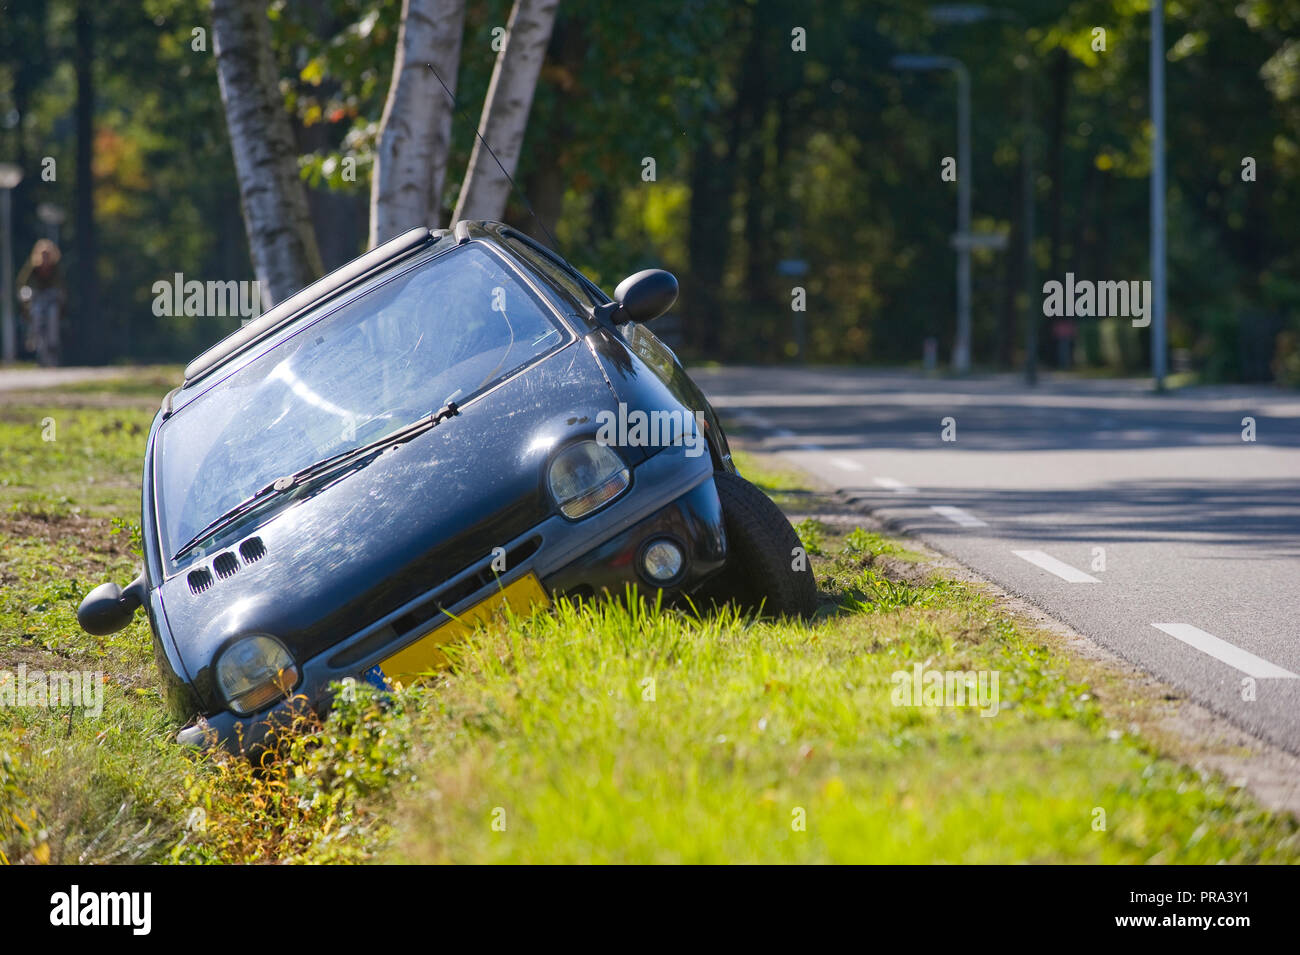 A car had driven into a ditch Stock Photo